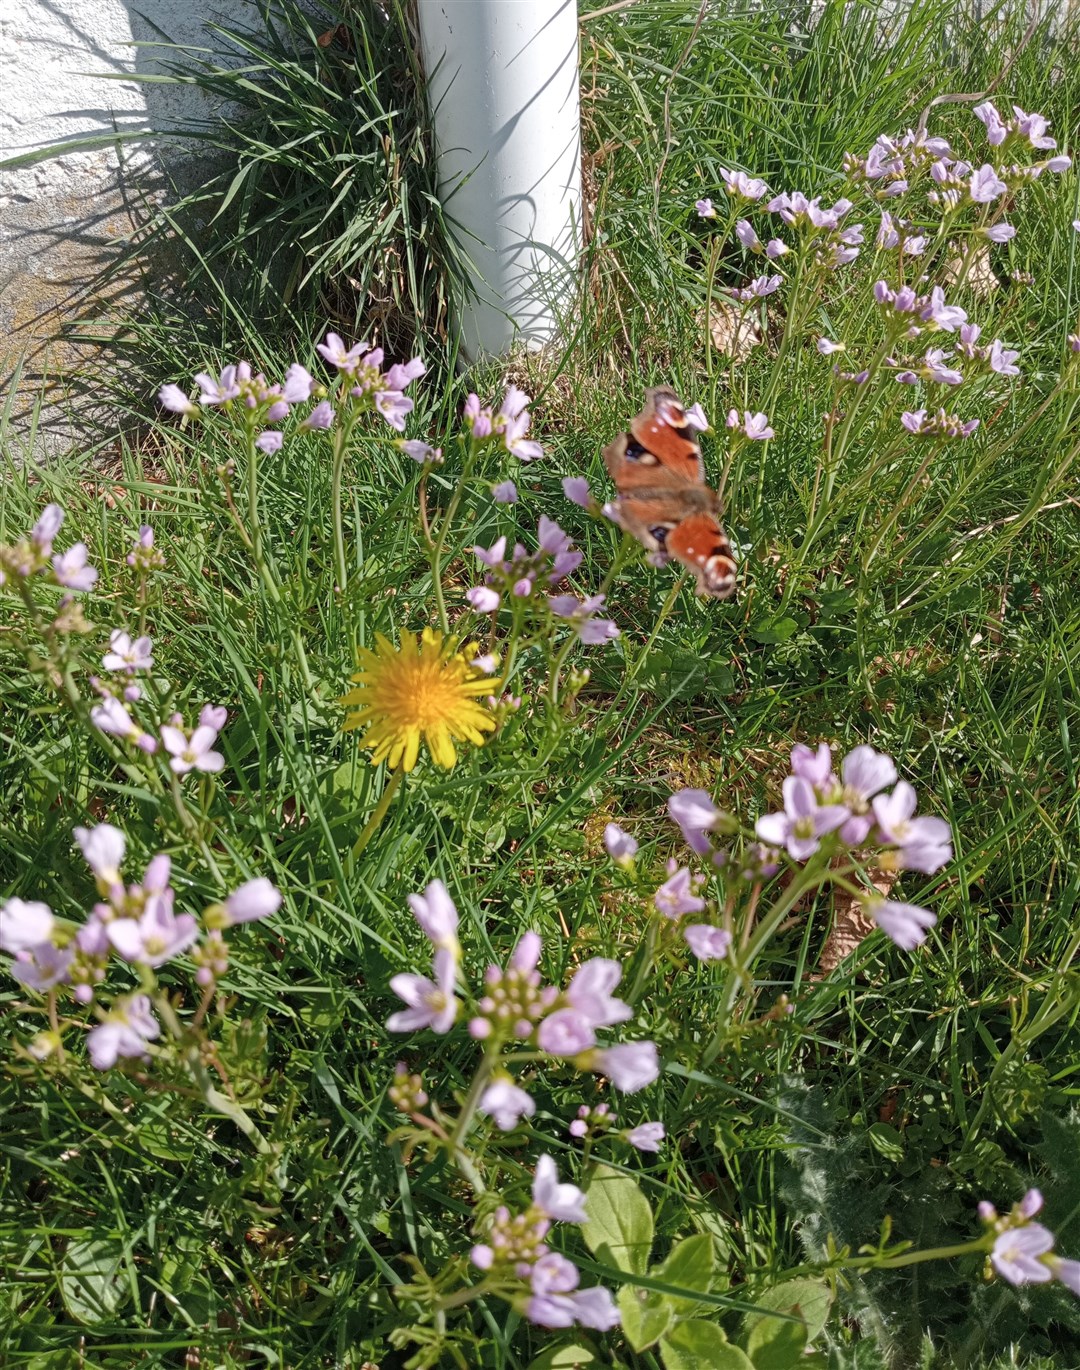 People are encourgaed not to moy their lawns in May to help encourage meadow flowers which attract pollinators.